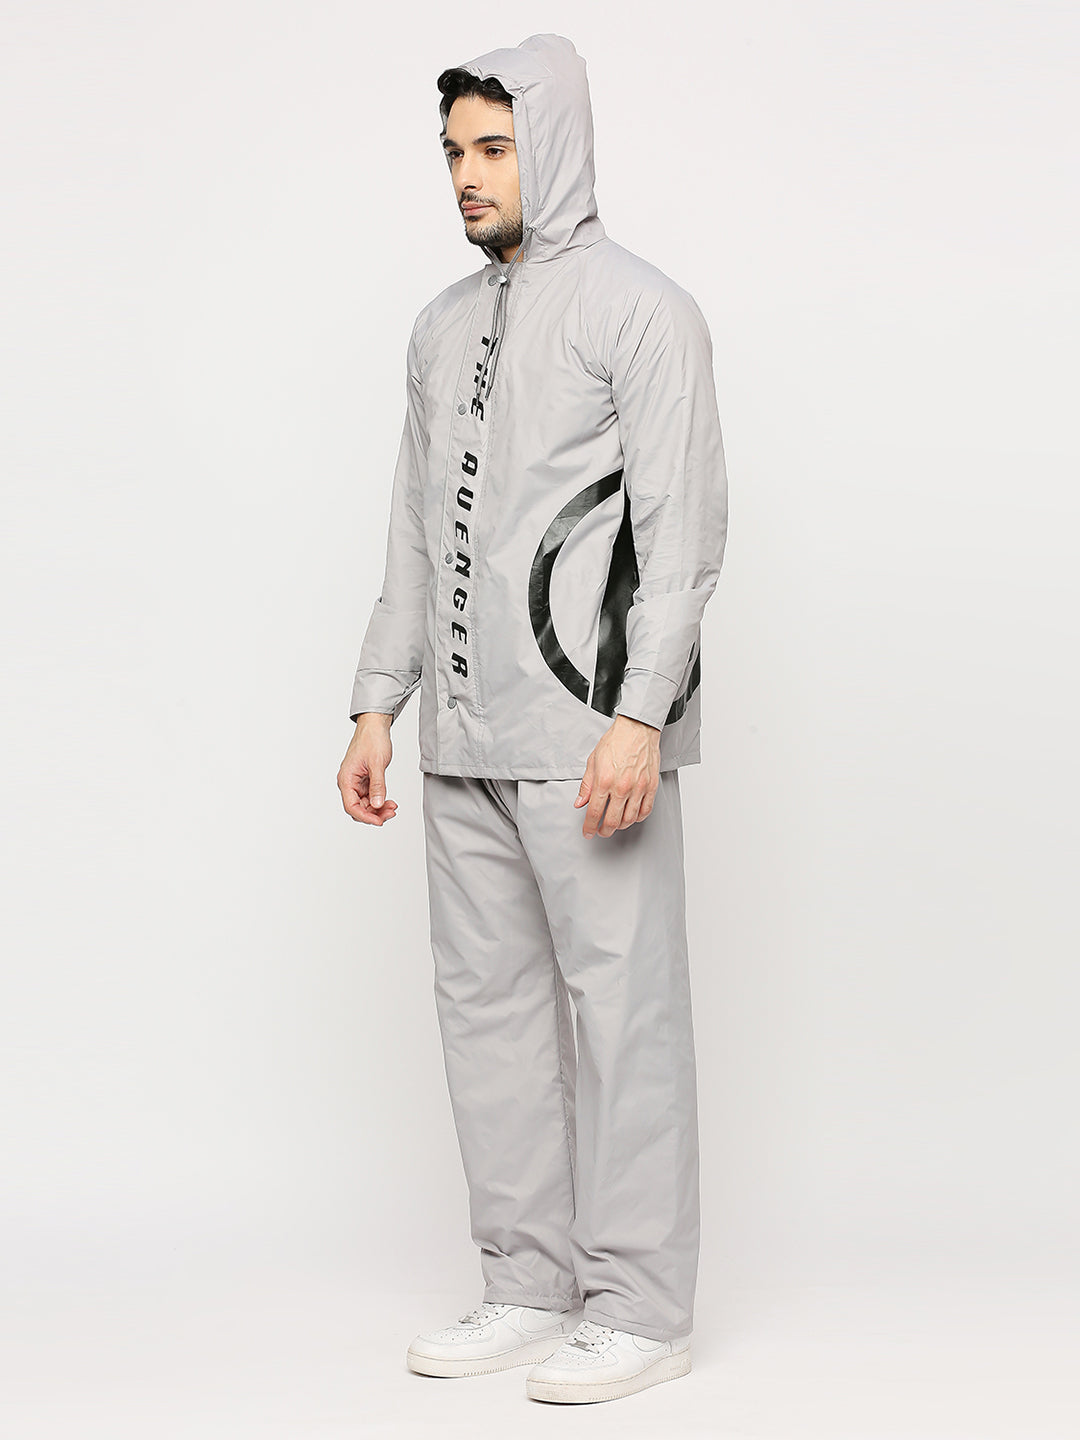 Smoky Gray Reversible Raincoat Suit with Free-leak proof pouch